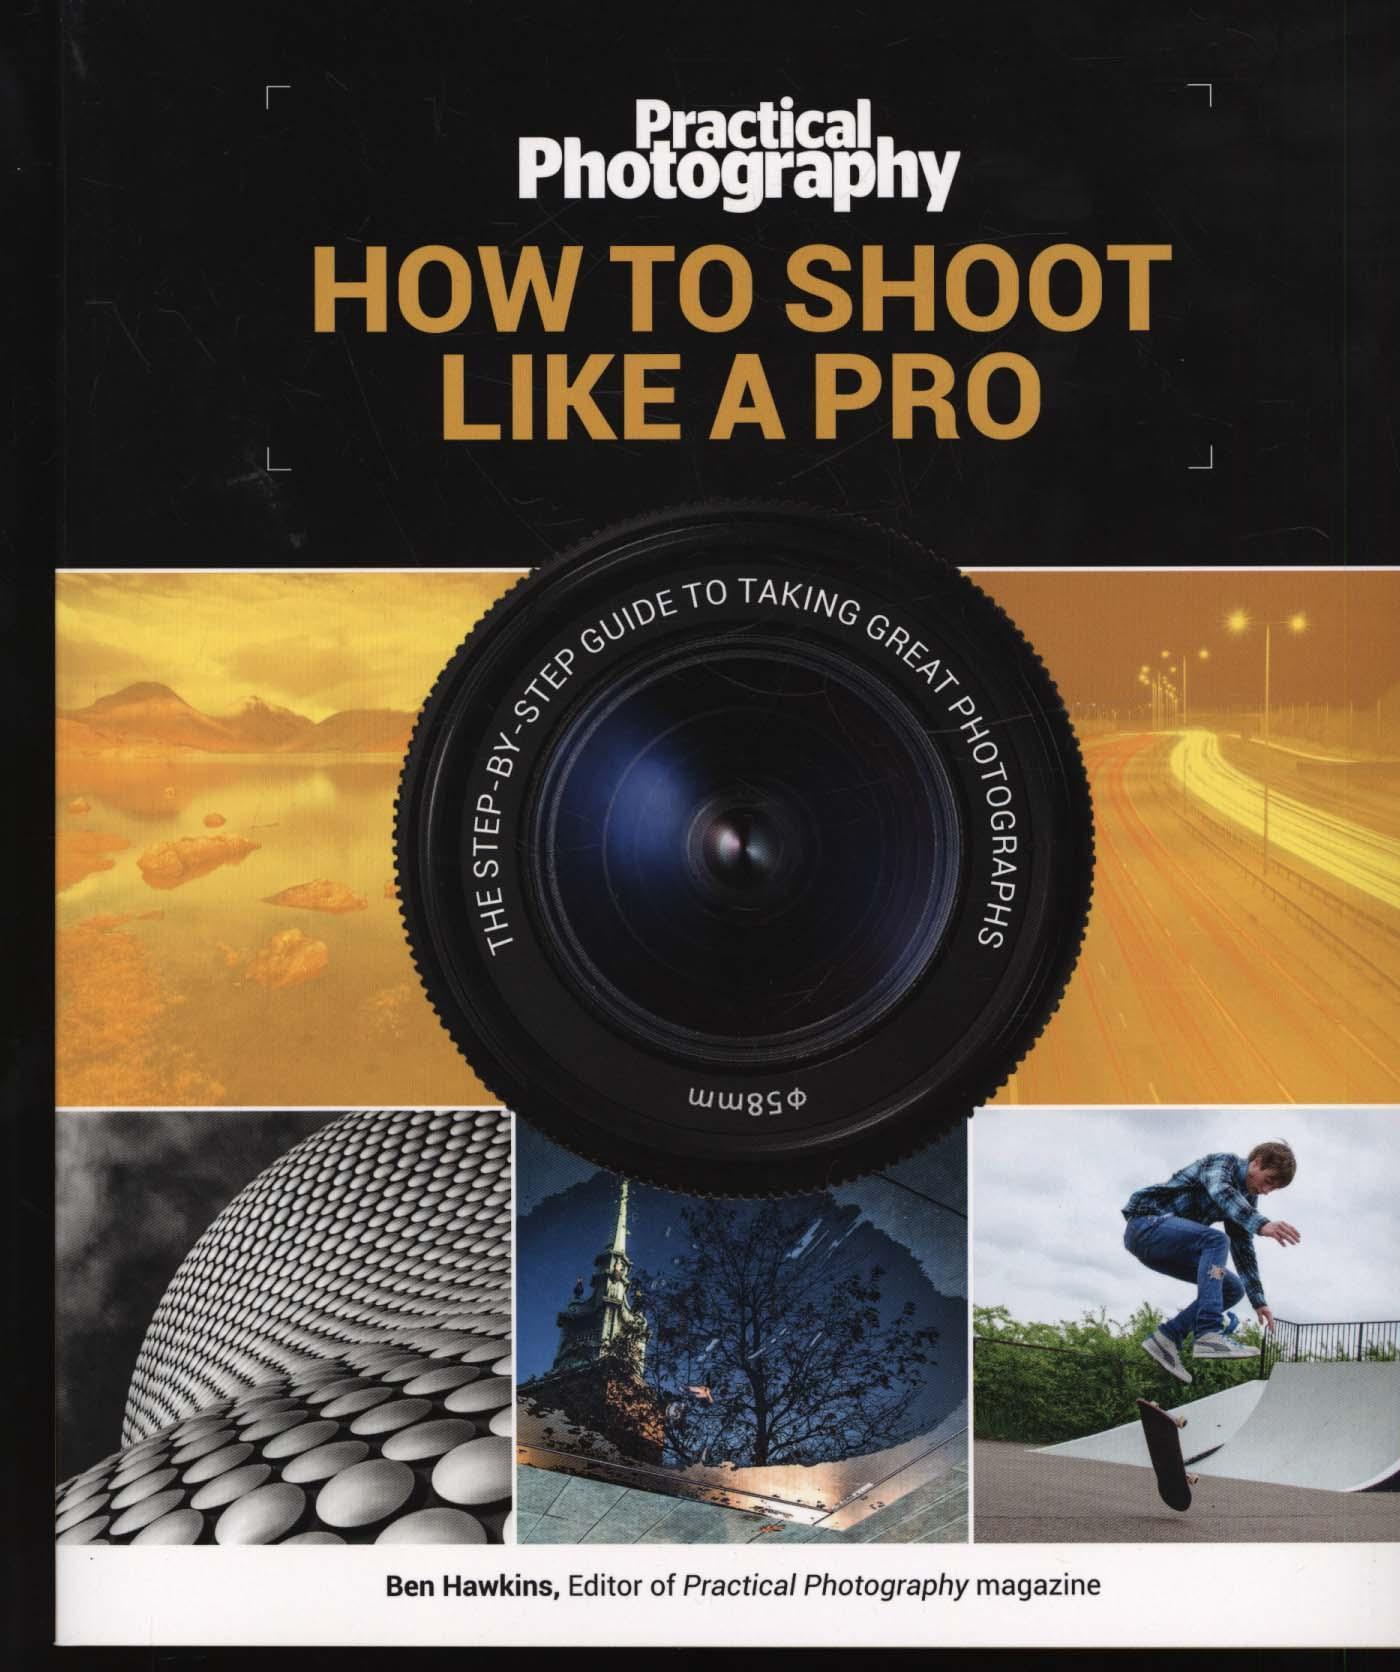 Practical Photography: How to Shoot Like a Pro